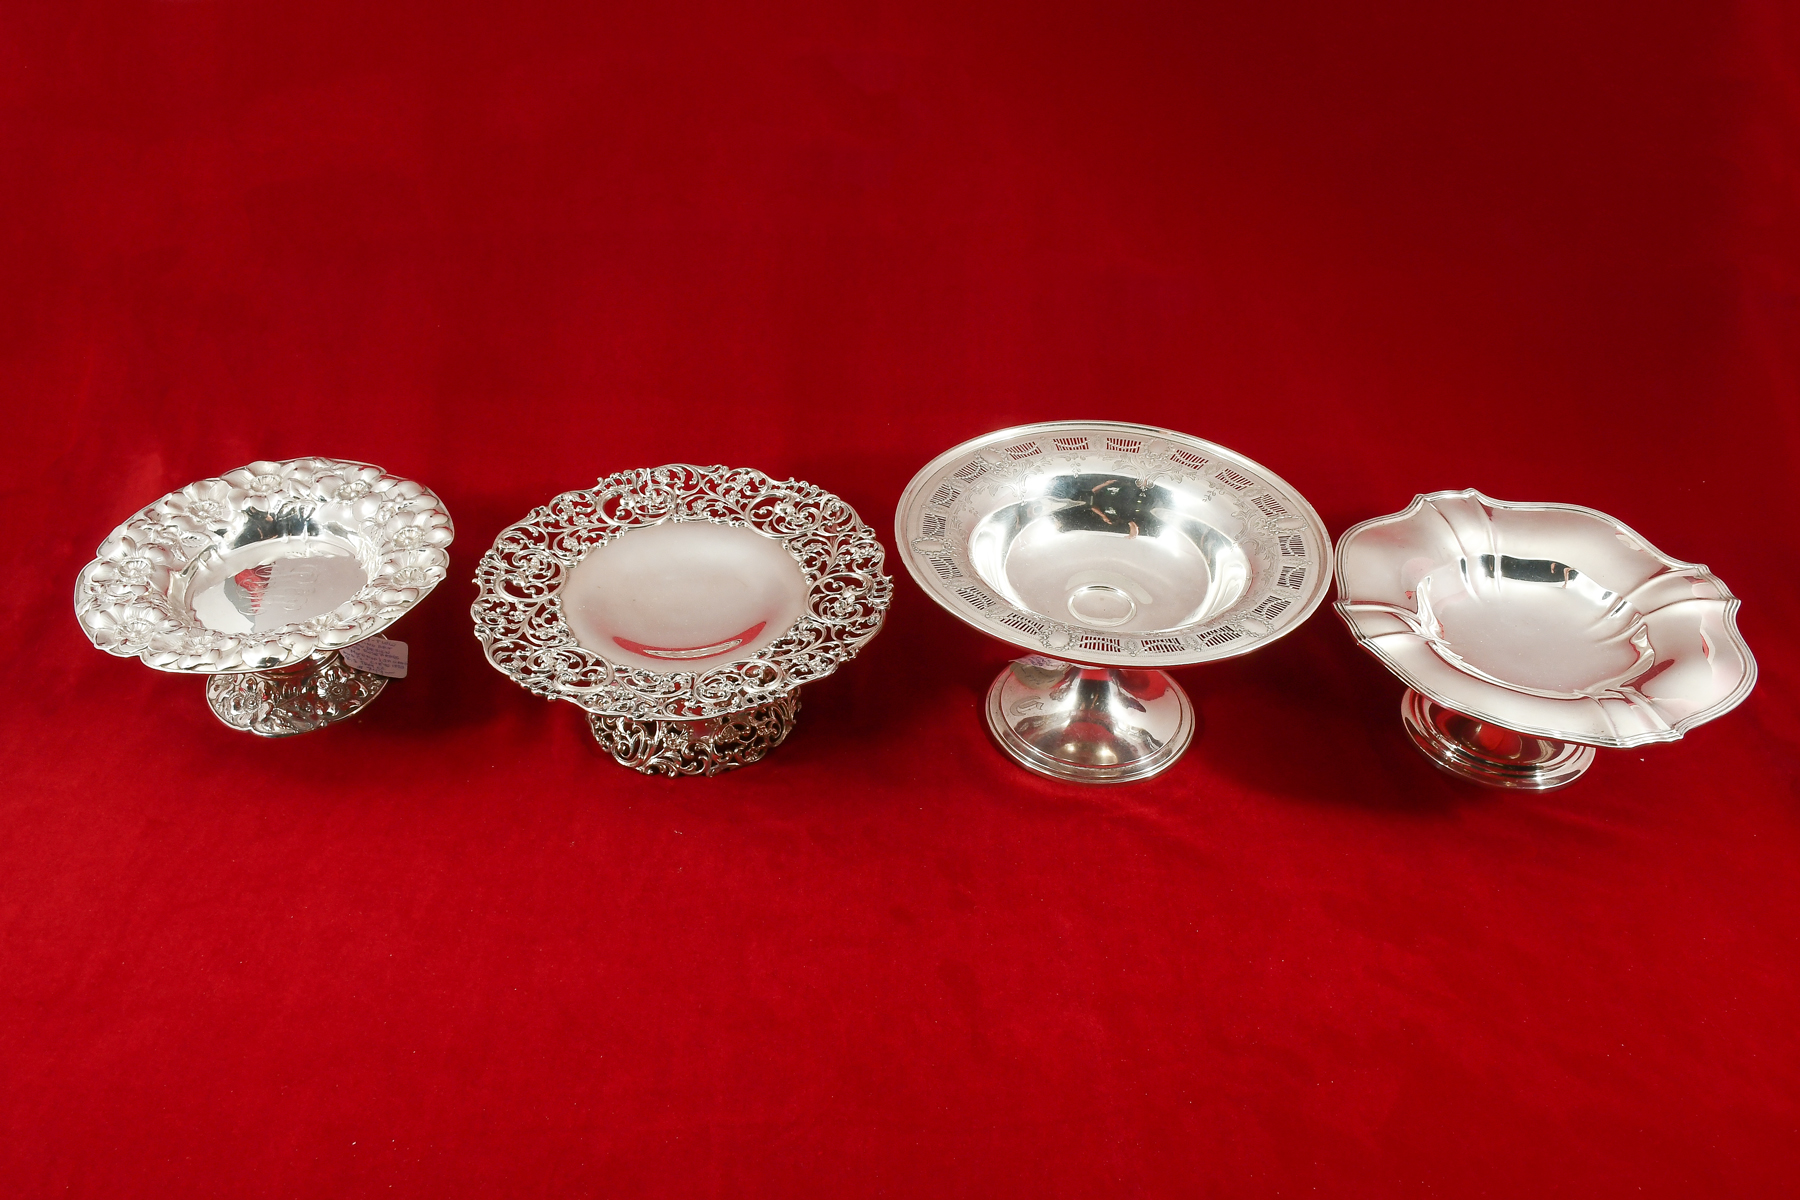 4 PC. STERLING COMPOTES / TAZZAS: